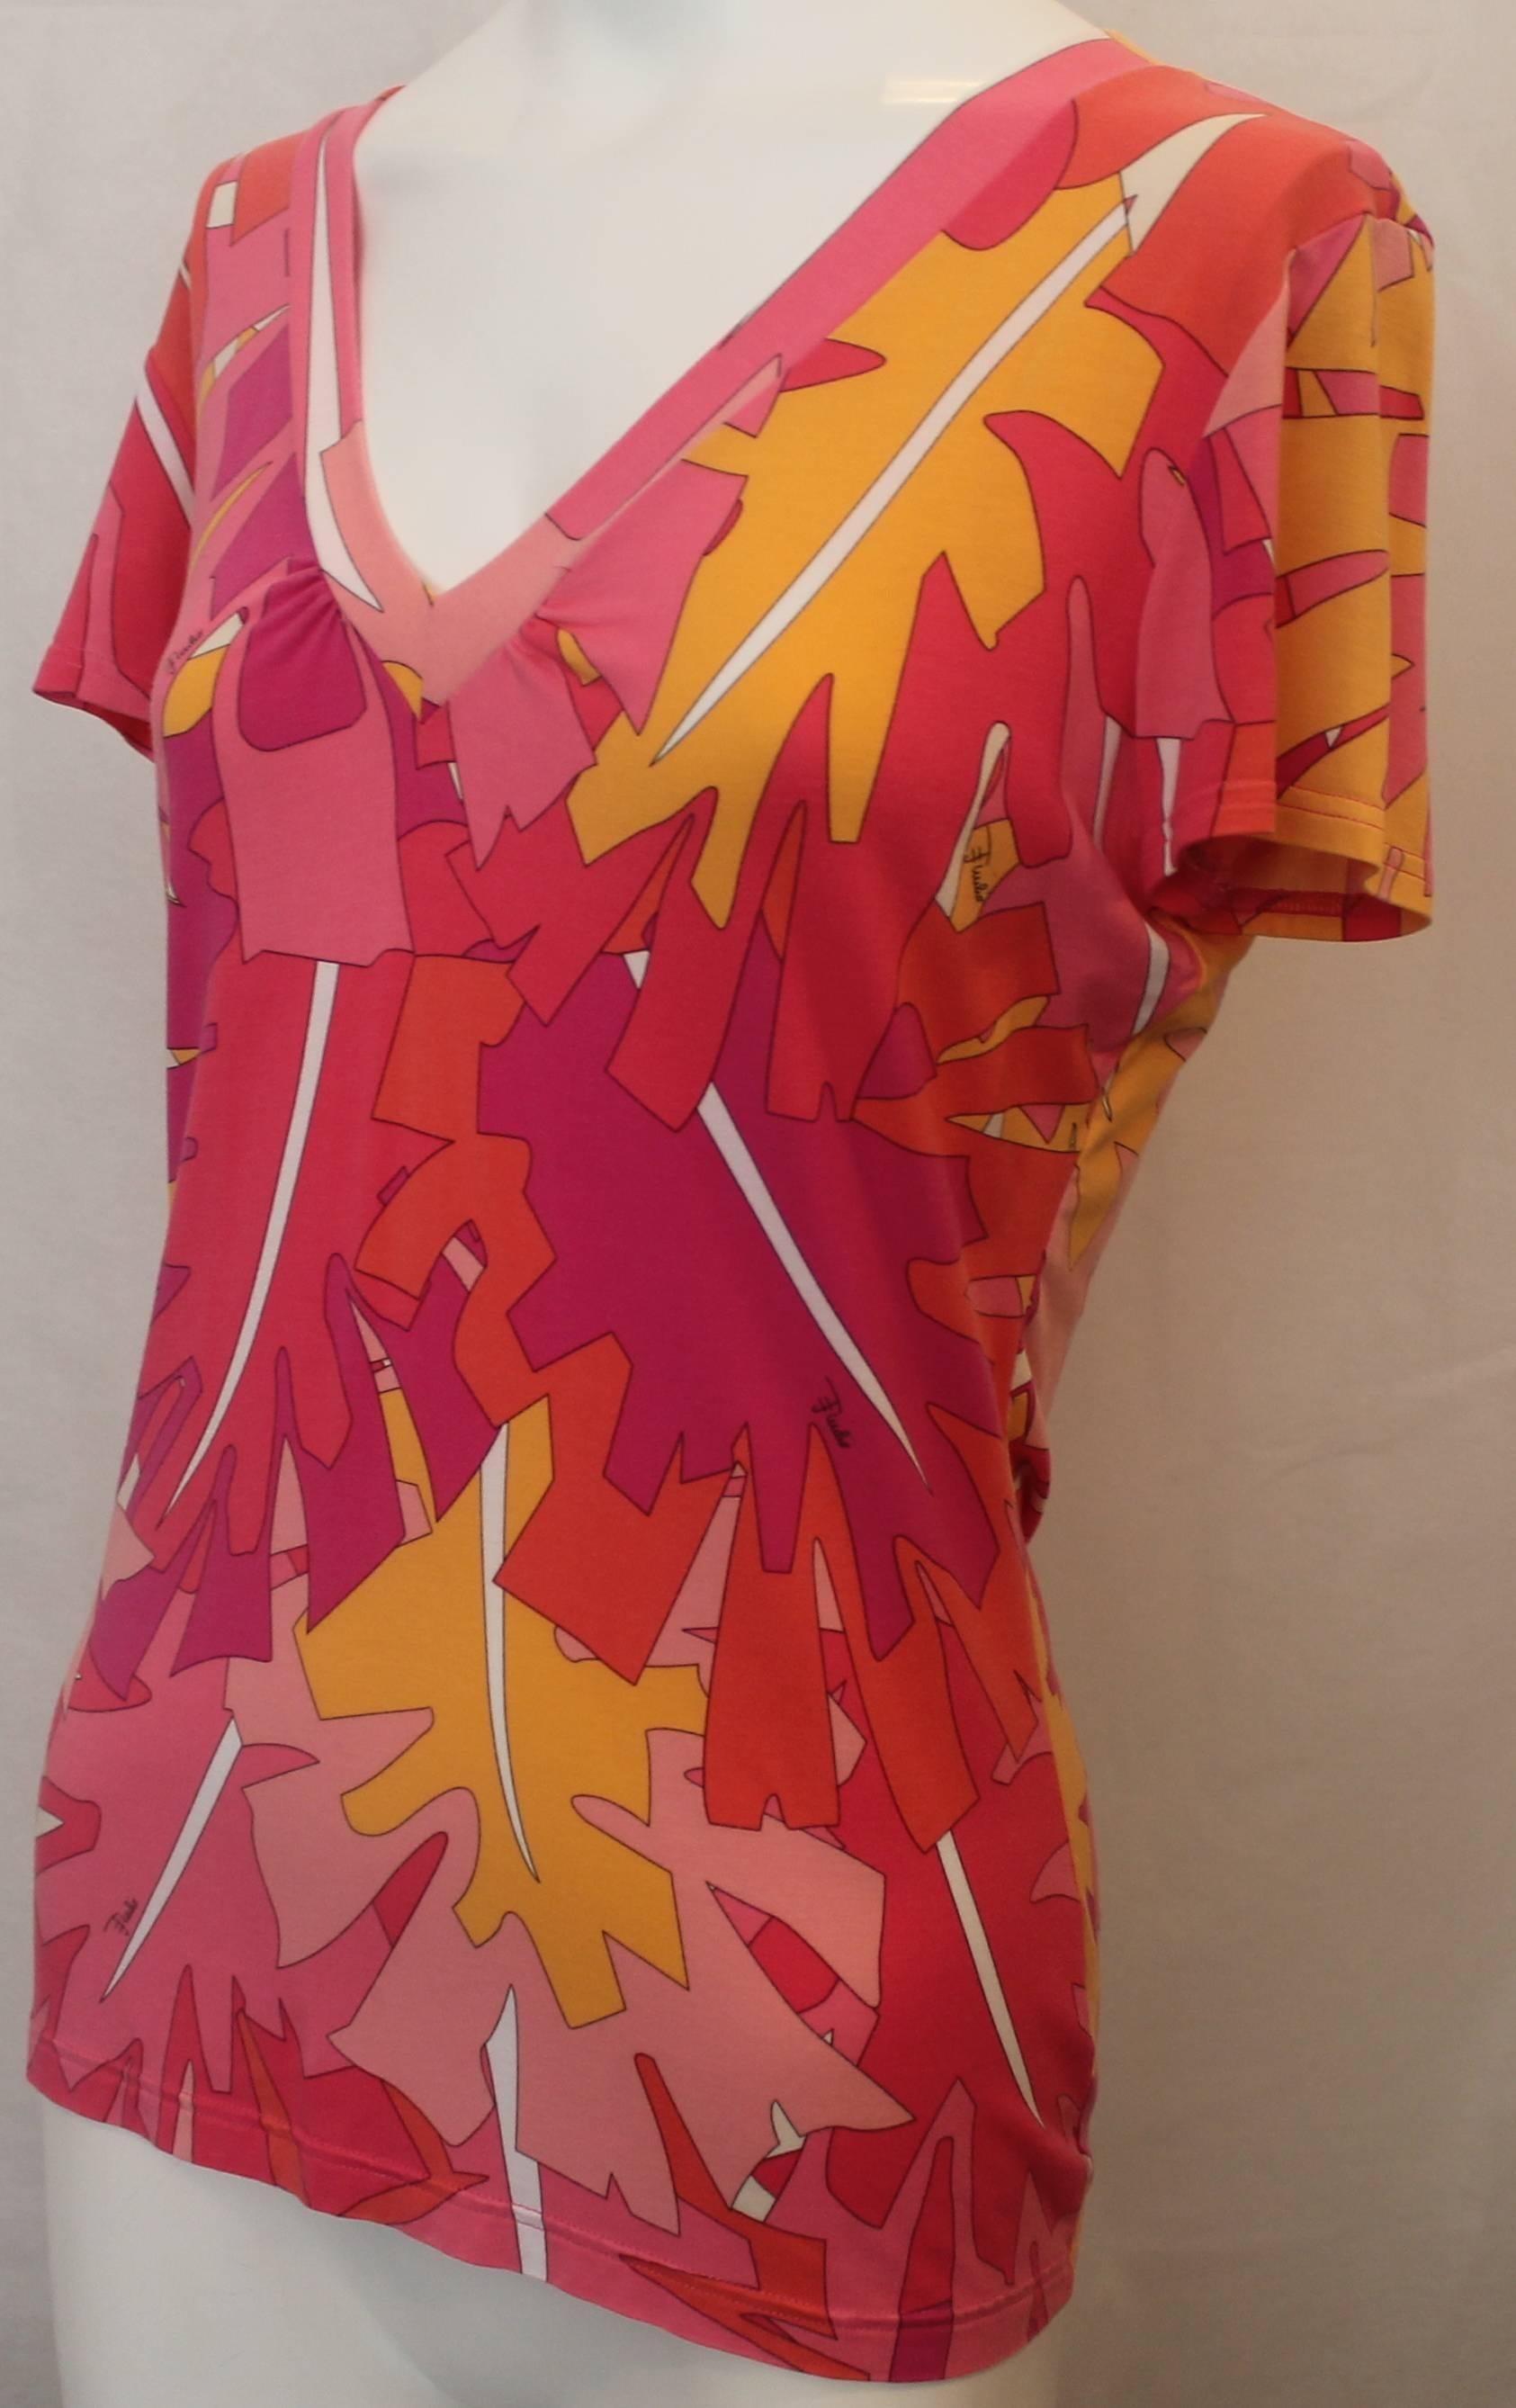 Emilio Pucci Pink and Orange Printed Synthetic Blend Short Sleeve V-Neck Top - L. This pink and orange leaf printed top is great for the summertime! It has a v-neck and slight ruching. It is in very good condition with minor wear such as